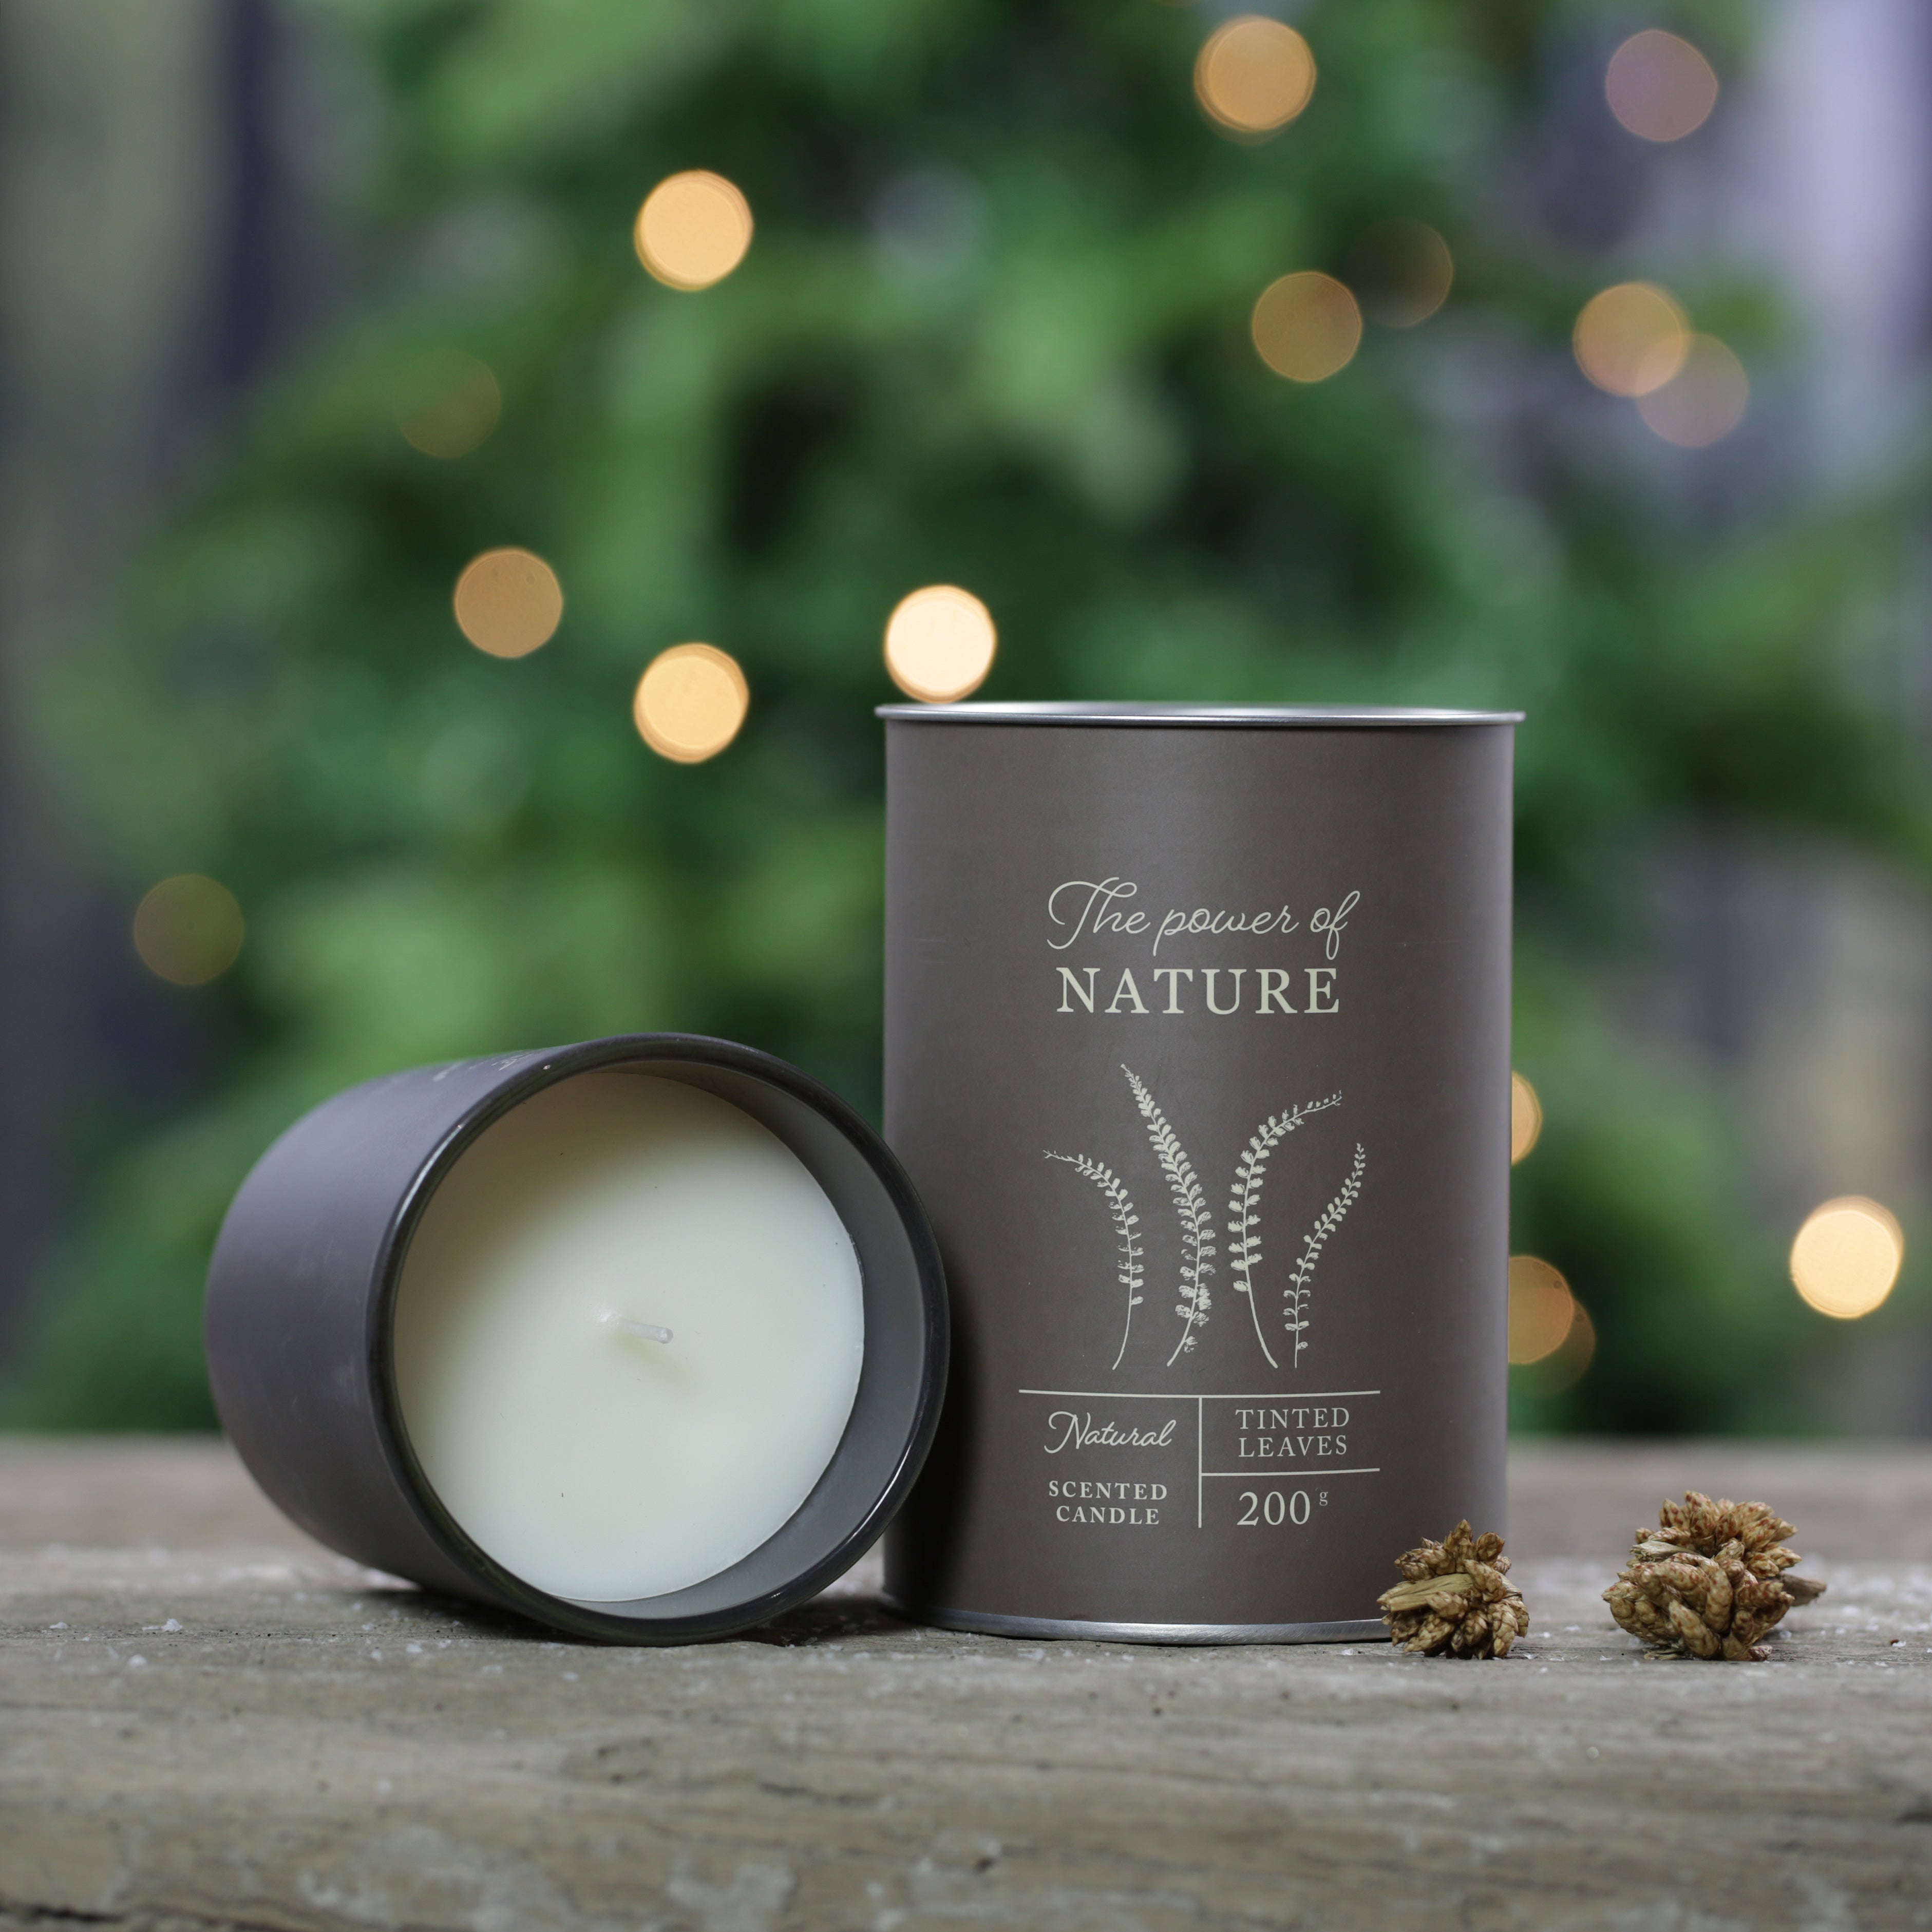 Luxury Power of Nature Scented Candle in Glass - 200g - Tinted Leaves